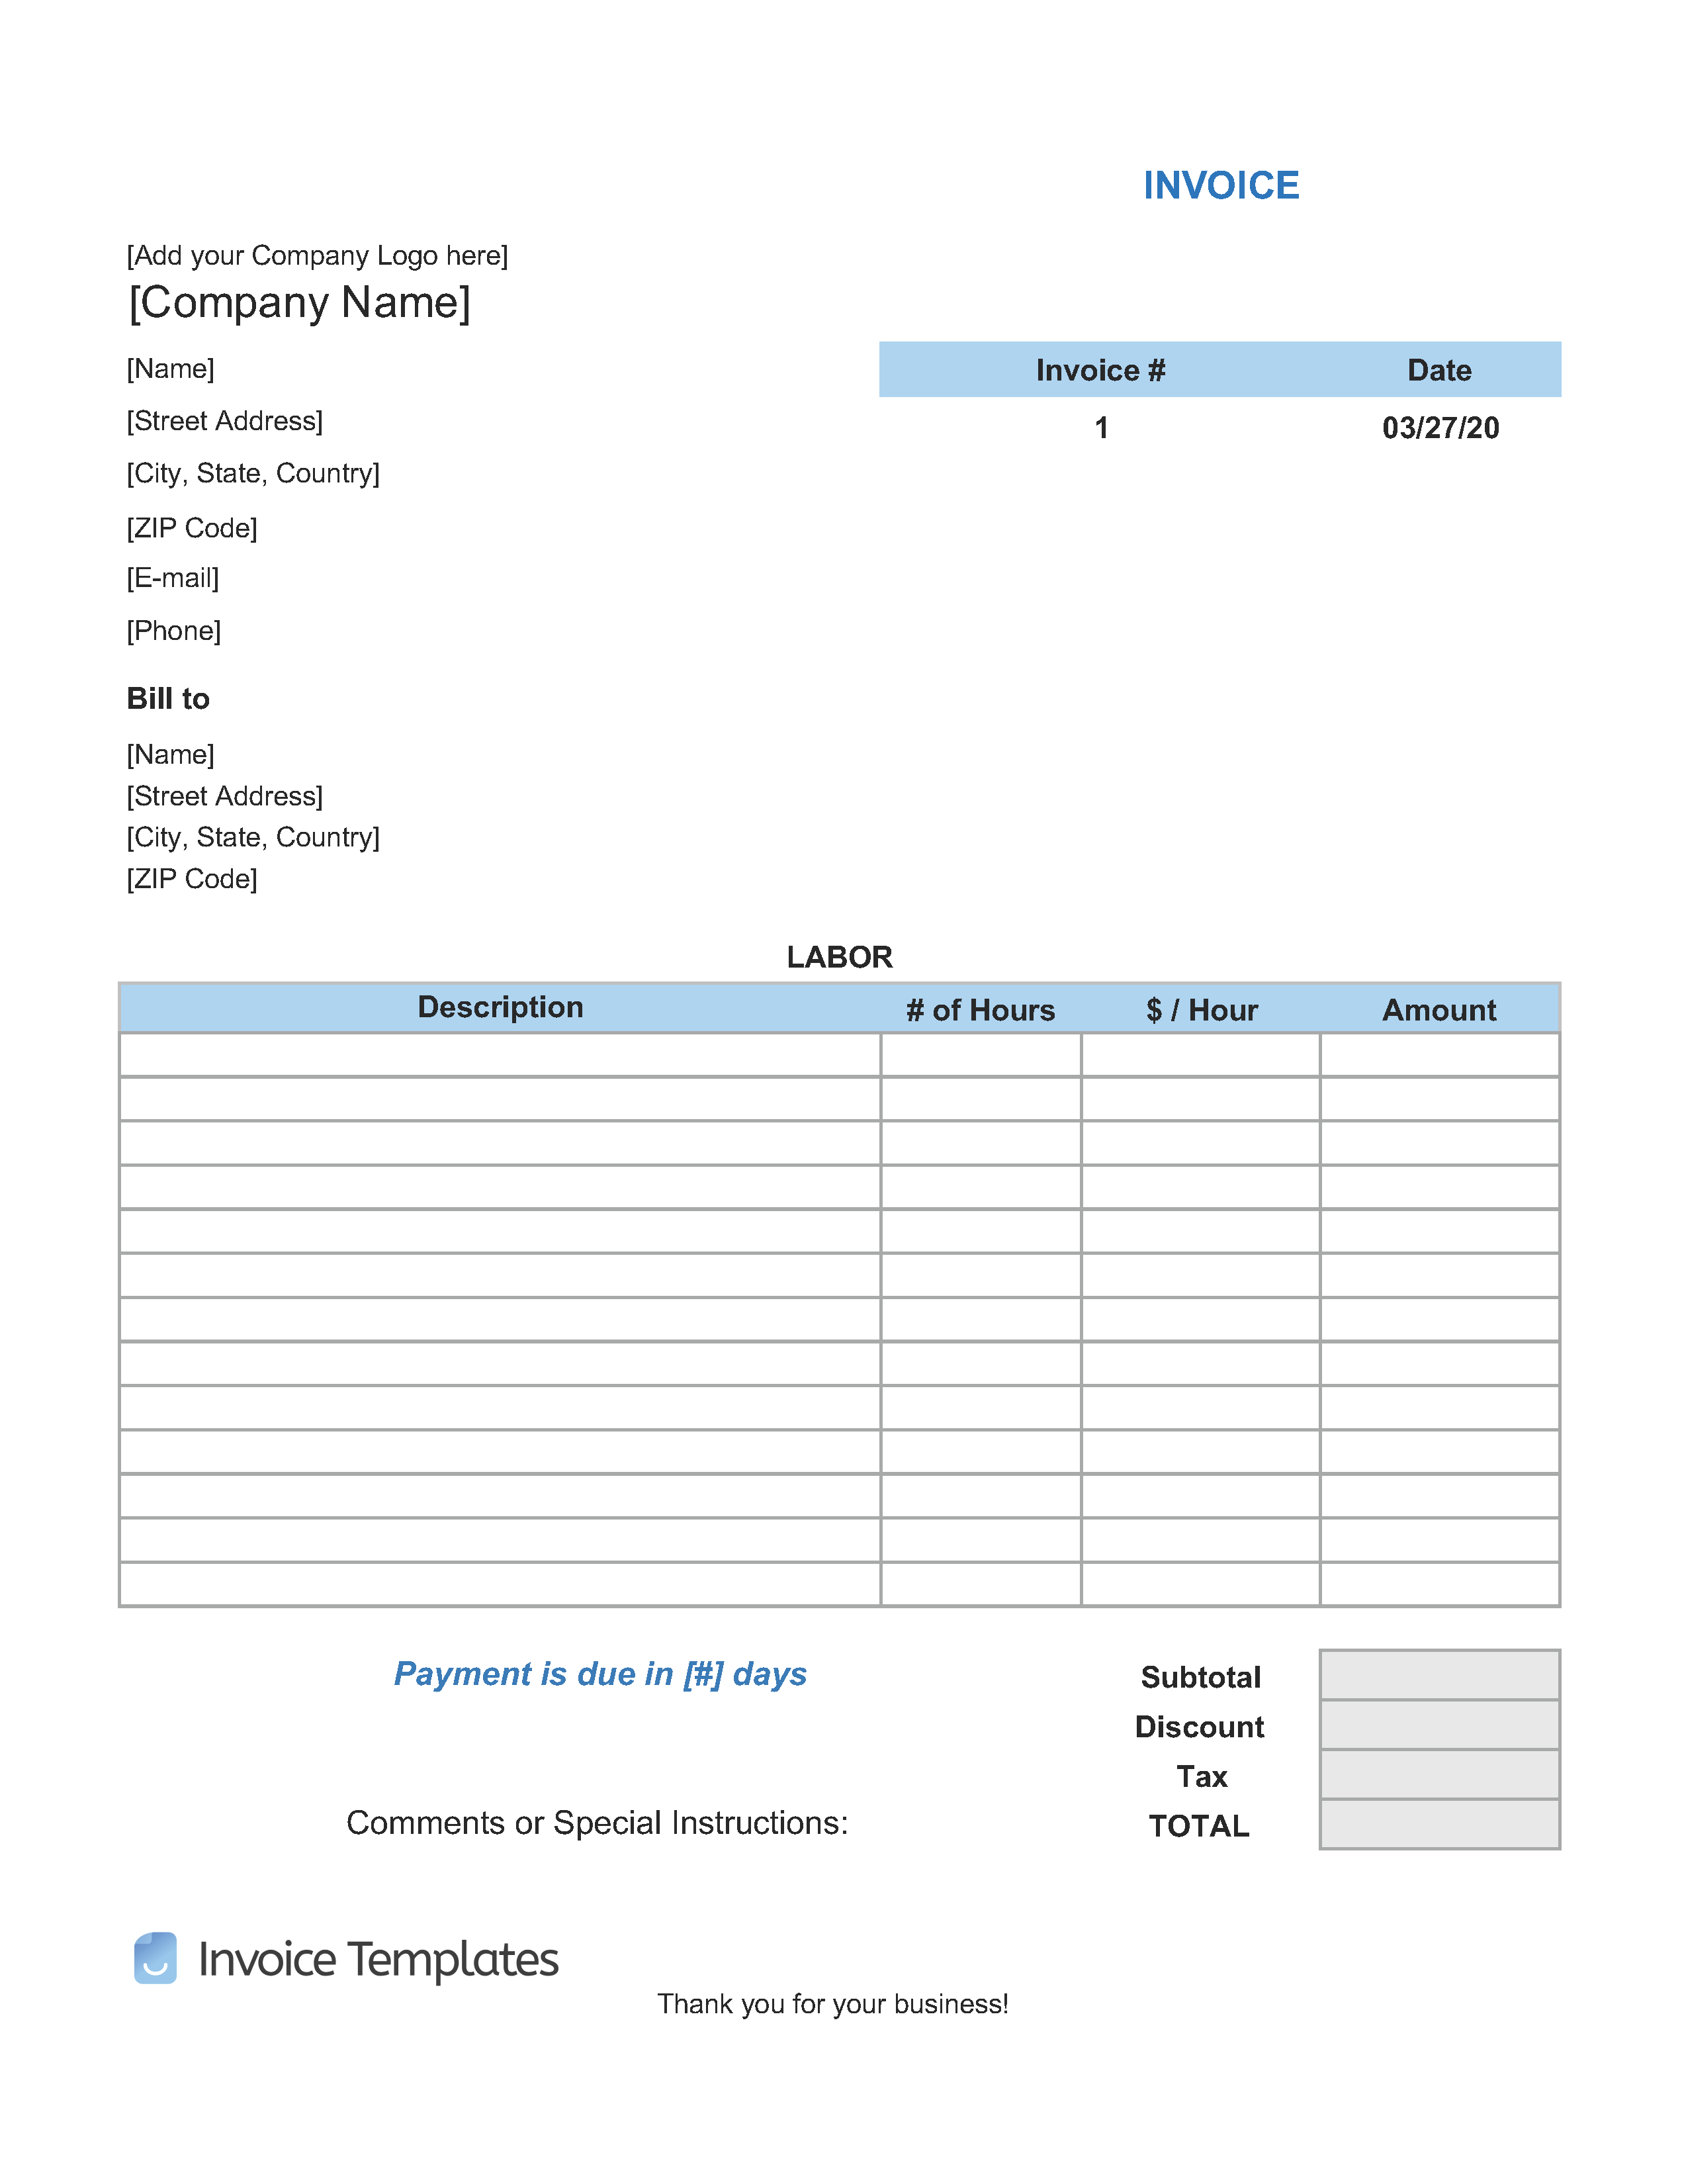 Microsoft Office Invoice Template Download from invoicetemplates.com